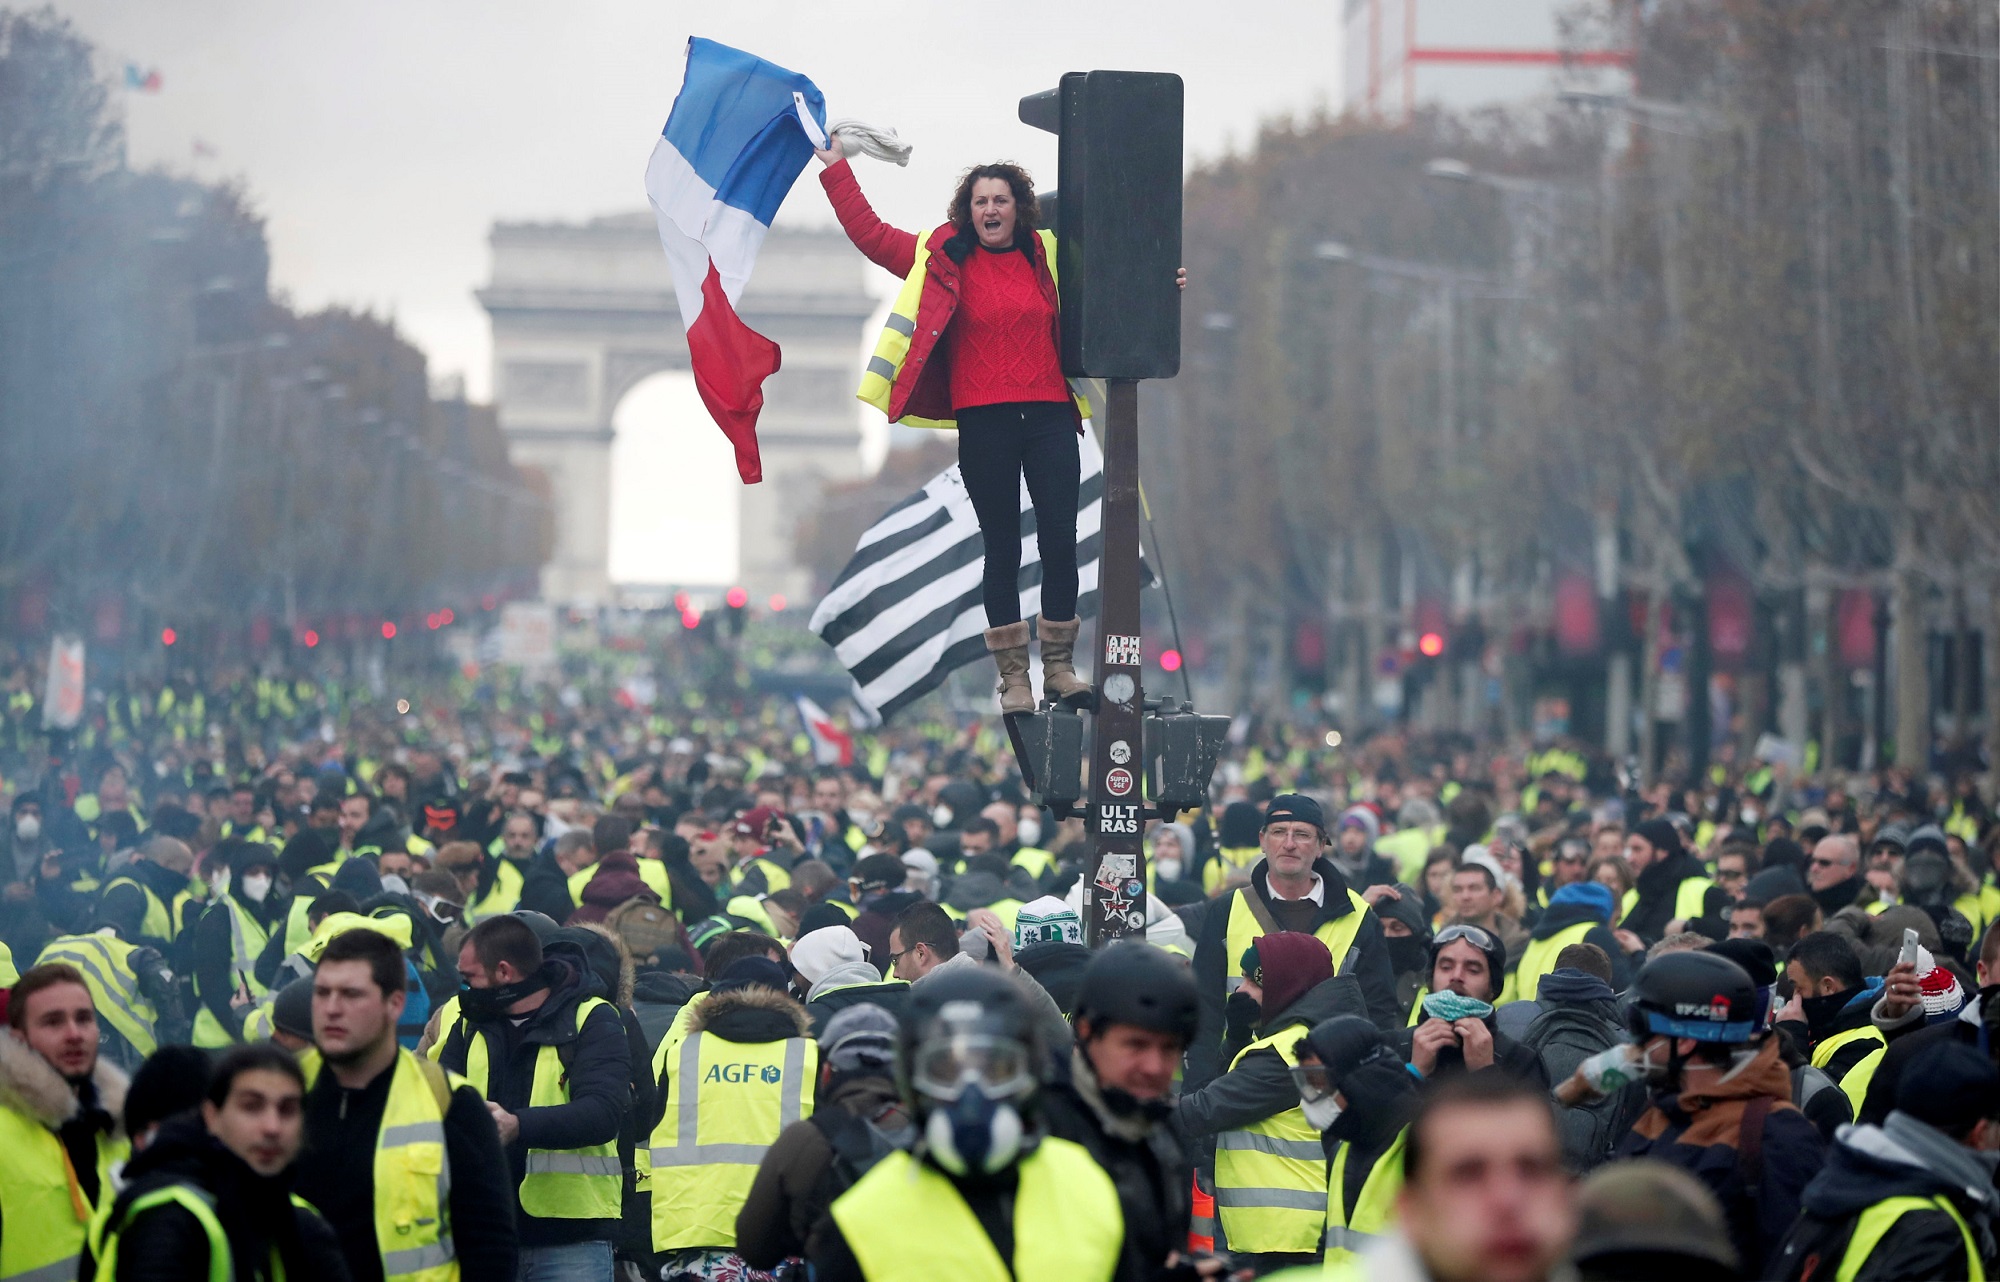 2018-11-24T104817Z_1444379157_RC1FD153CE40_RTRMADP_3_FRANCE-PROTESTS